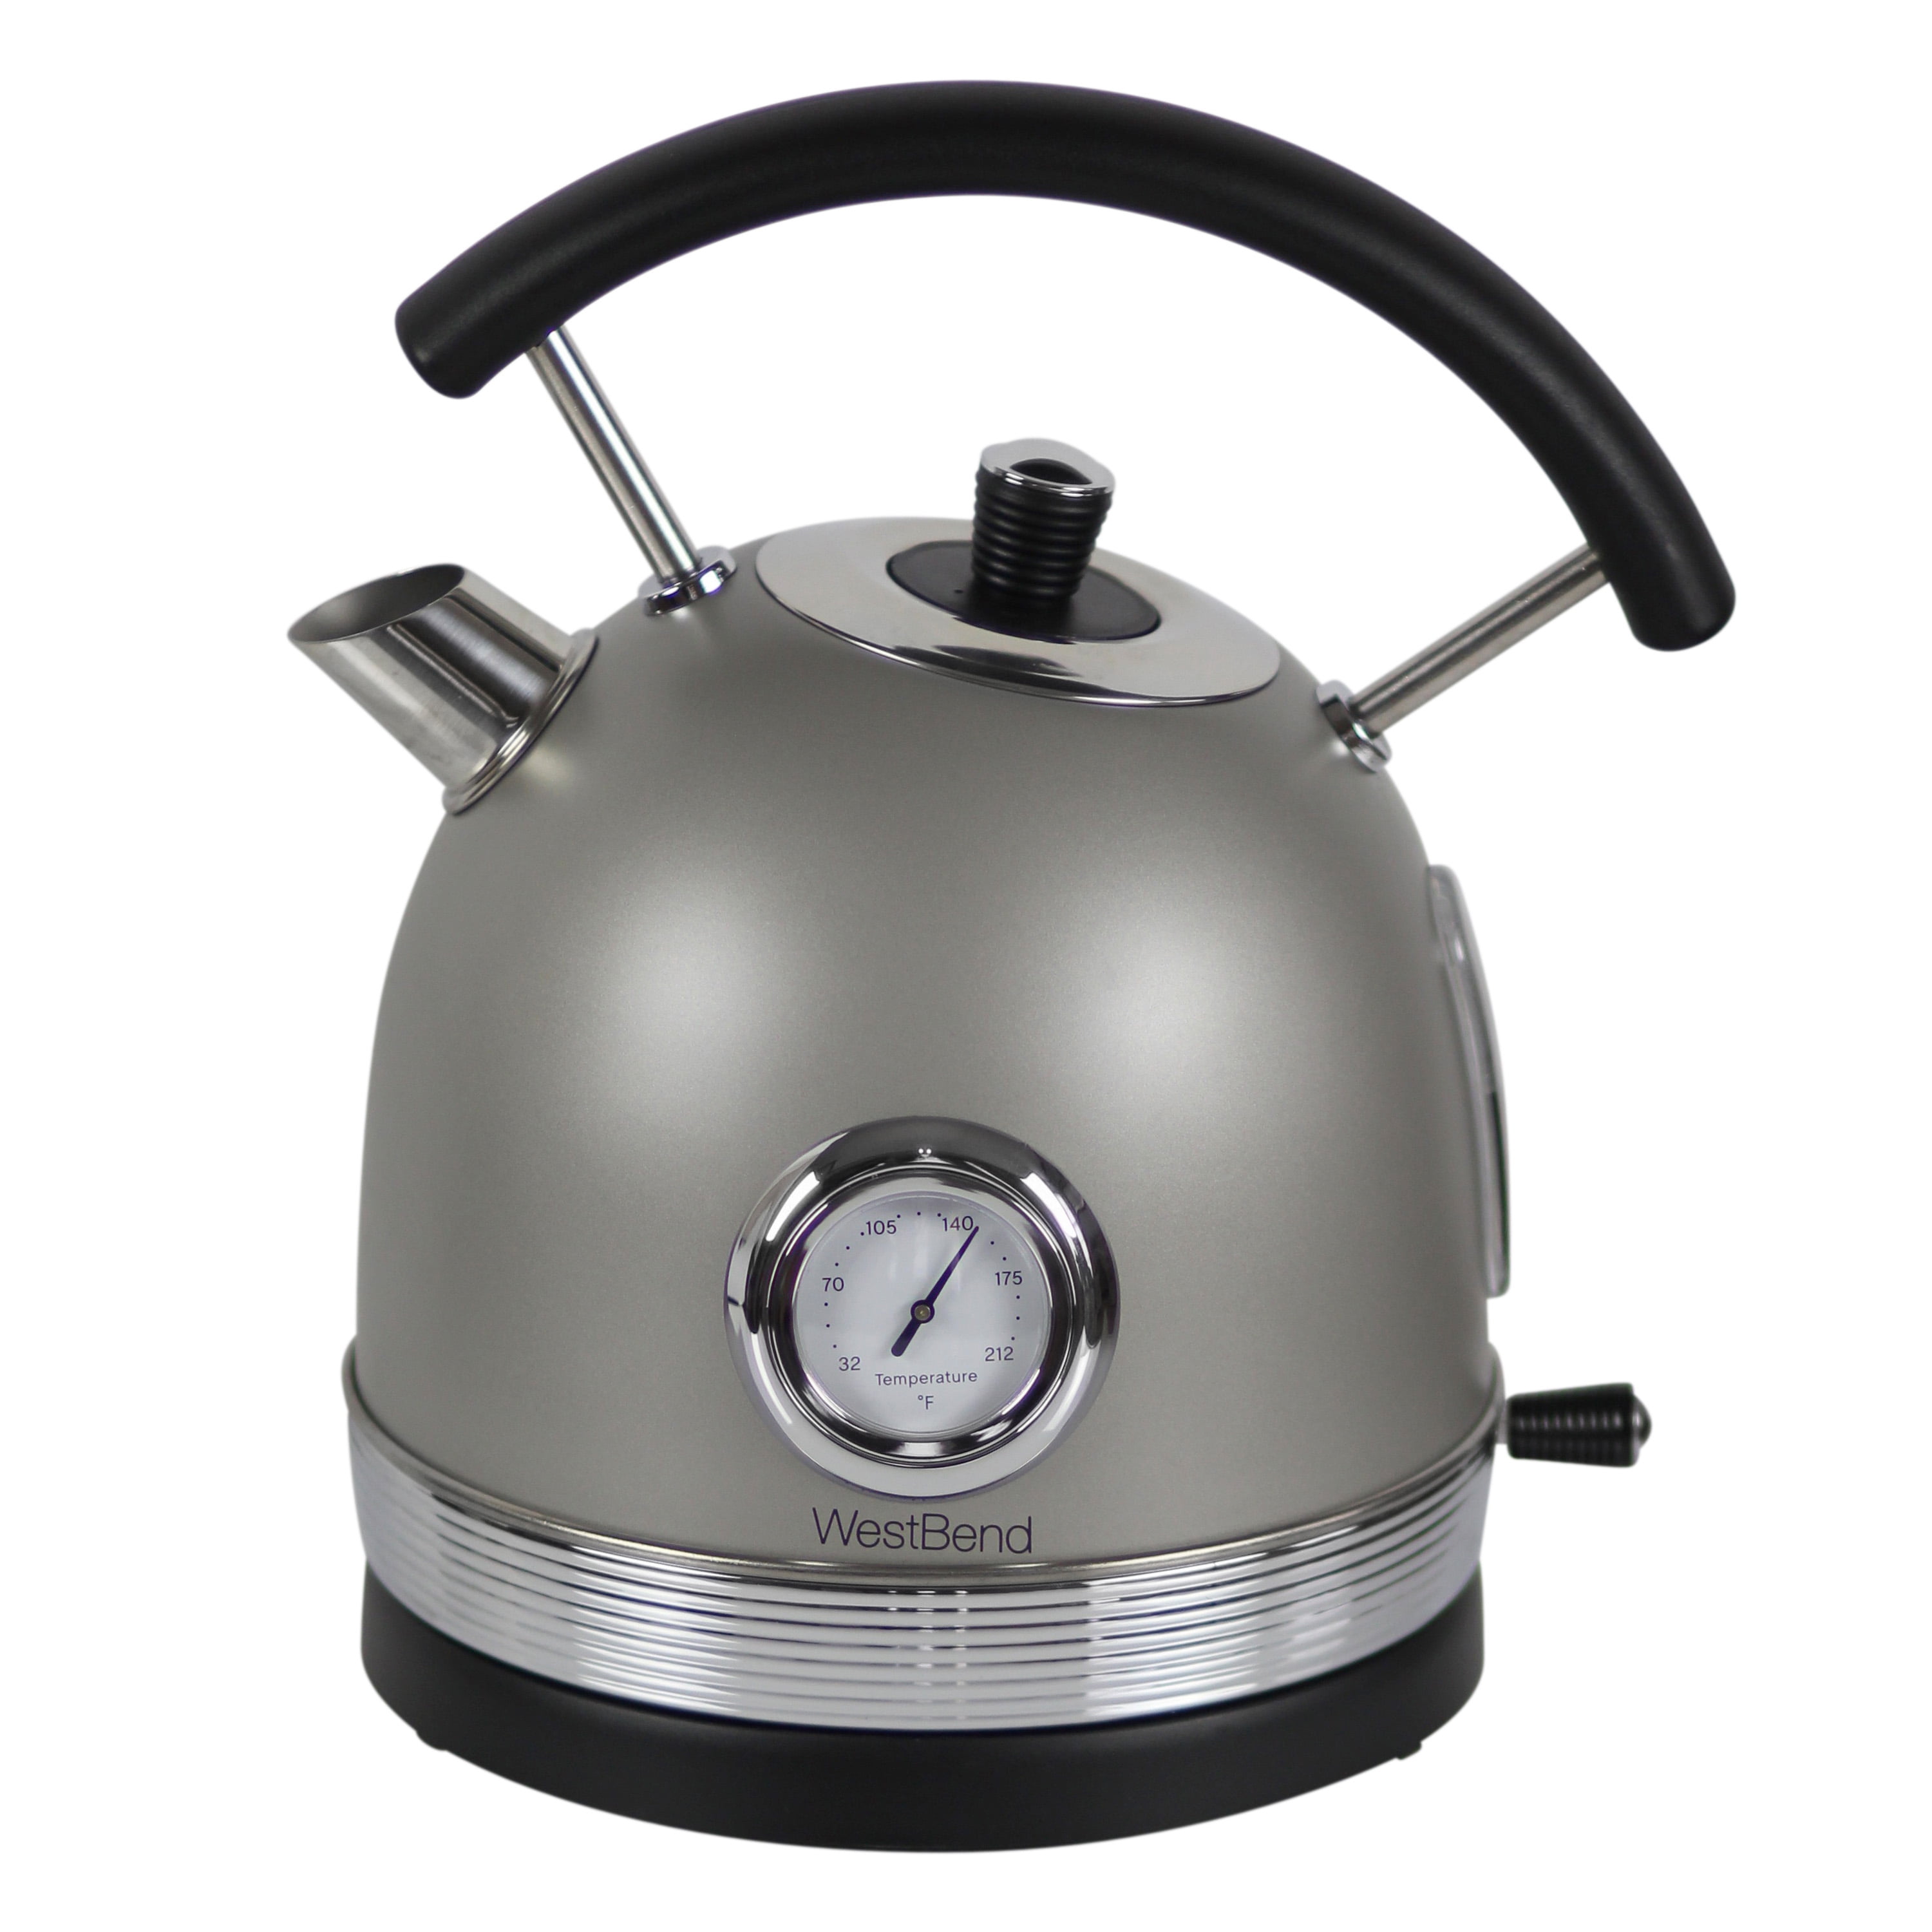 West Bend 2 - 5 cup hot pot & Aroma electric kettle. Both came on